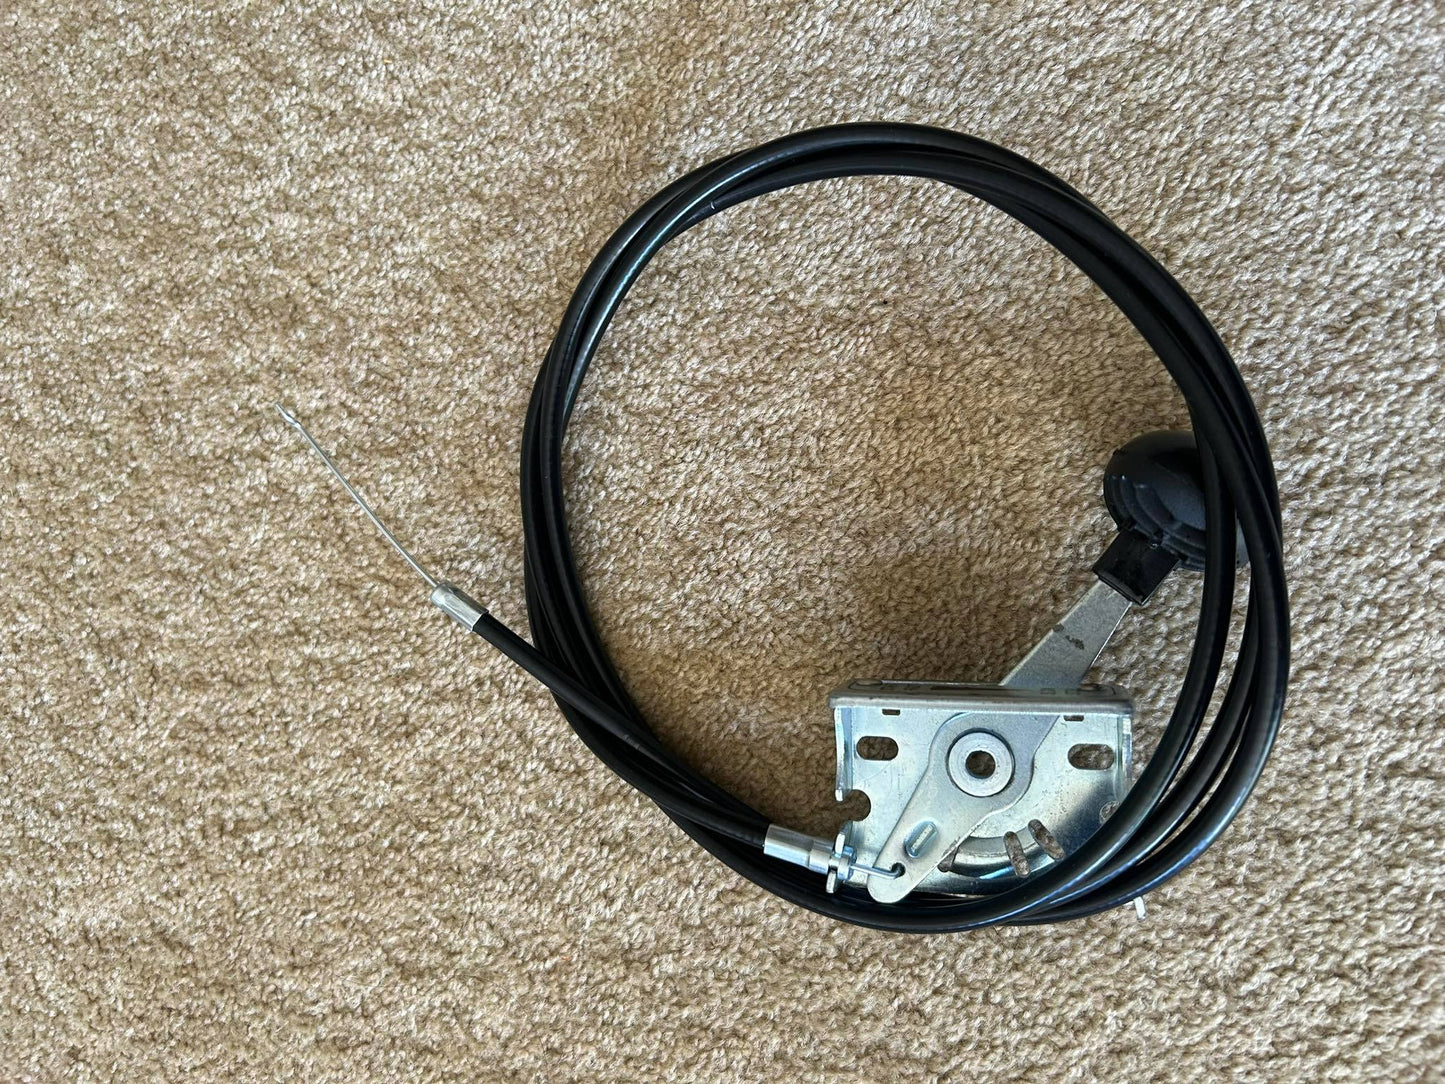 Universal Lawn Mower Throttle Control with 1.8m Cable